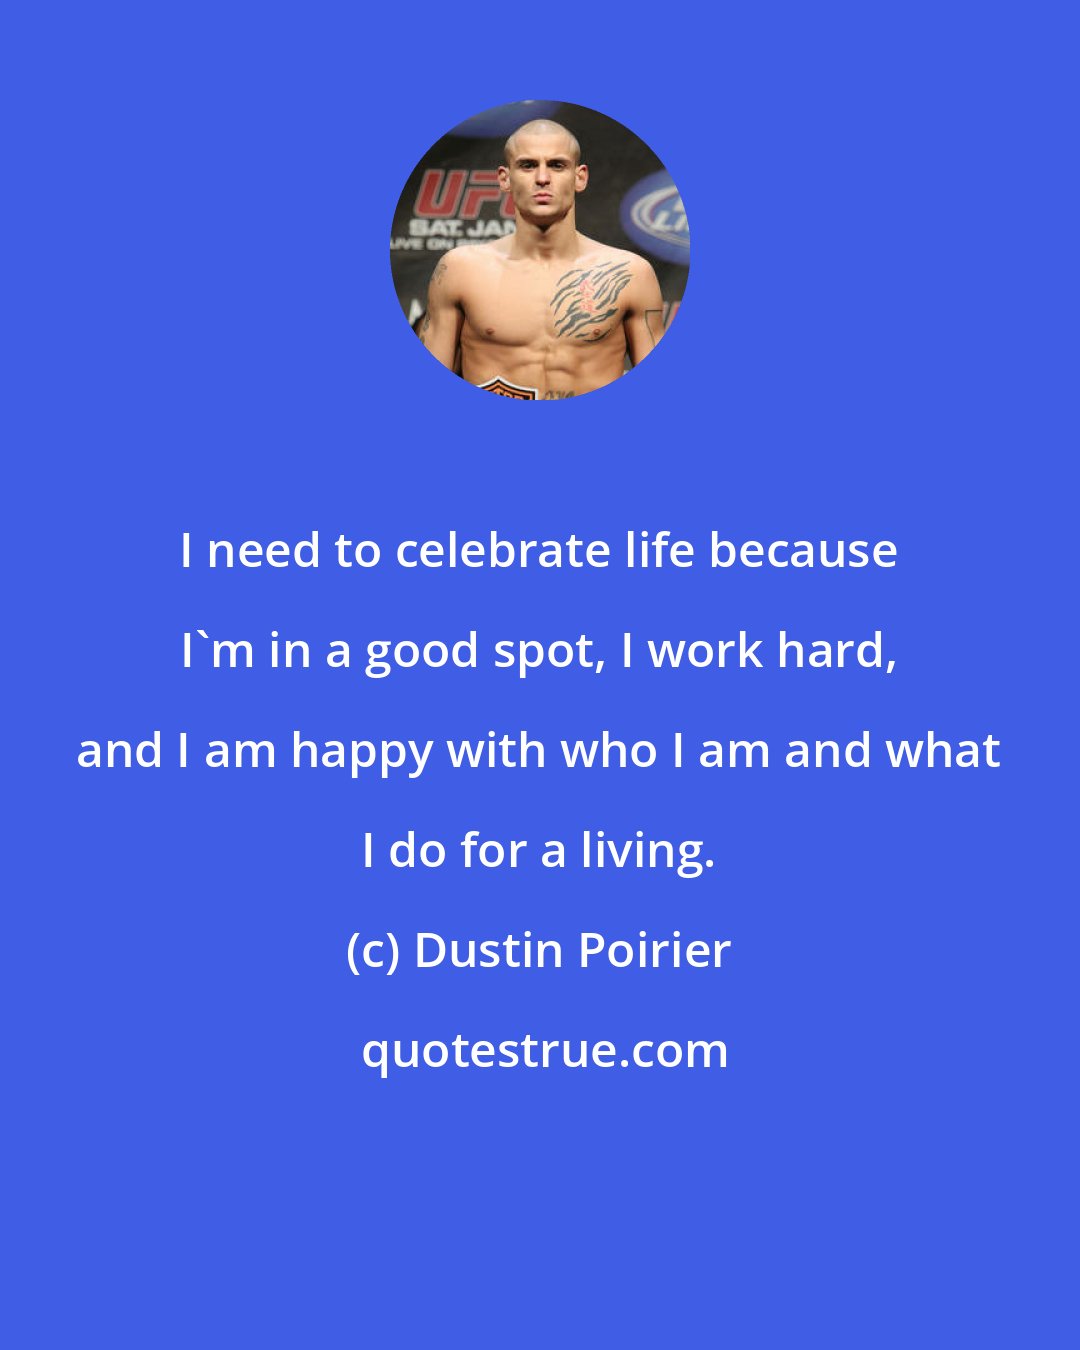 Dustin Poirier: I need to celebrate life because I'm in a good spot, I work hard, and I am happy with who I am and what I do for a living.